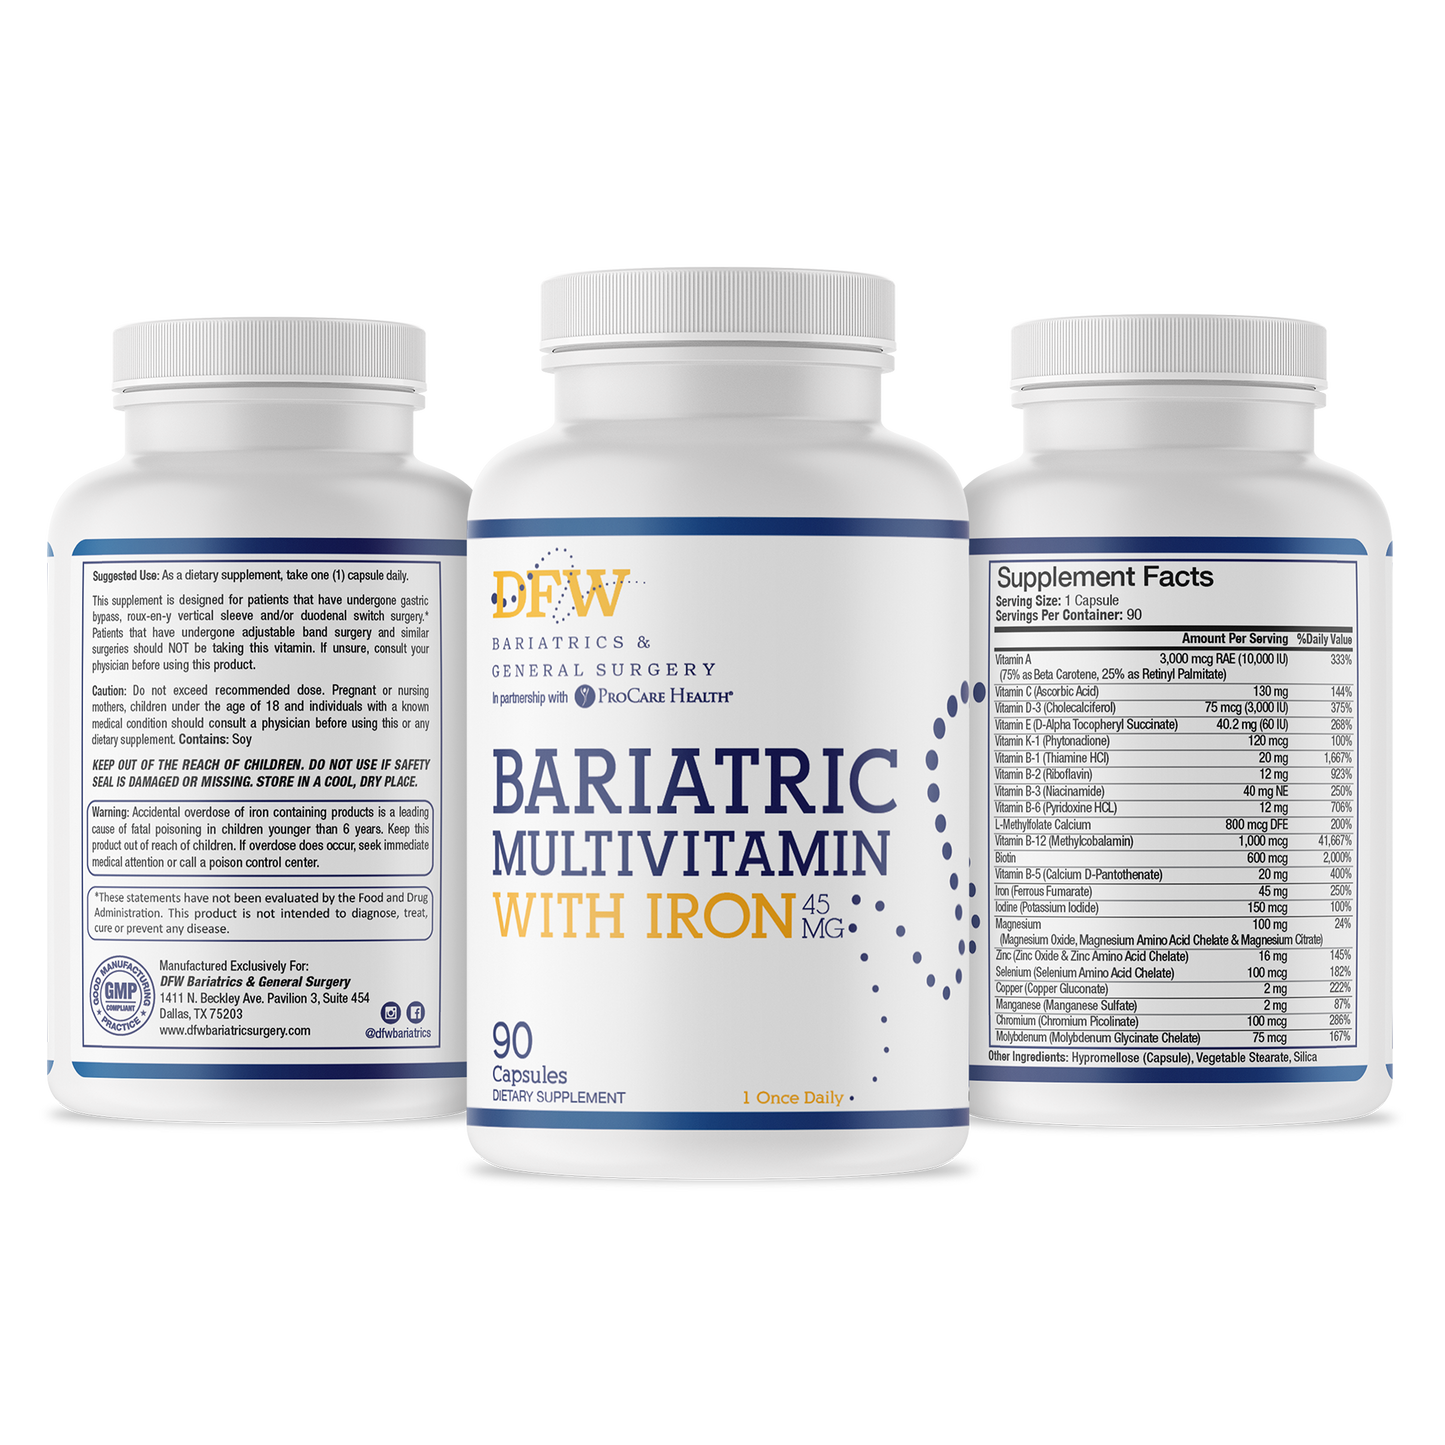 Bariatric Capsule Multivitamin (Sleeve, RYGB) - ONCE DAILY | 90 Day Supply